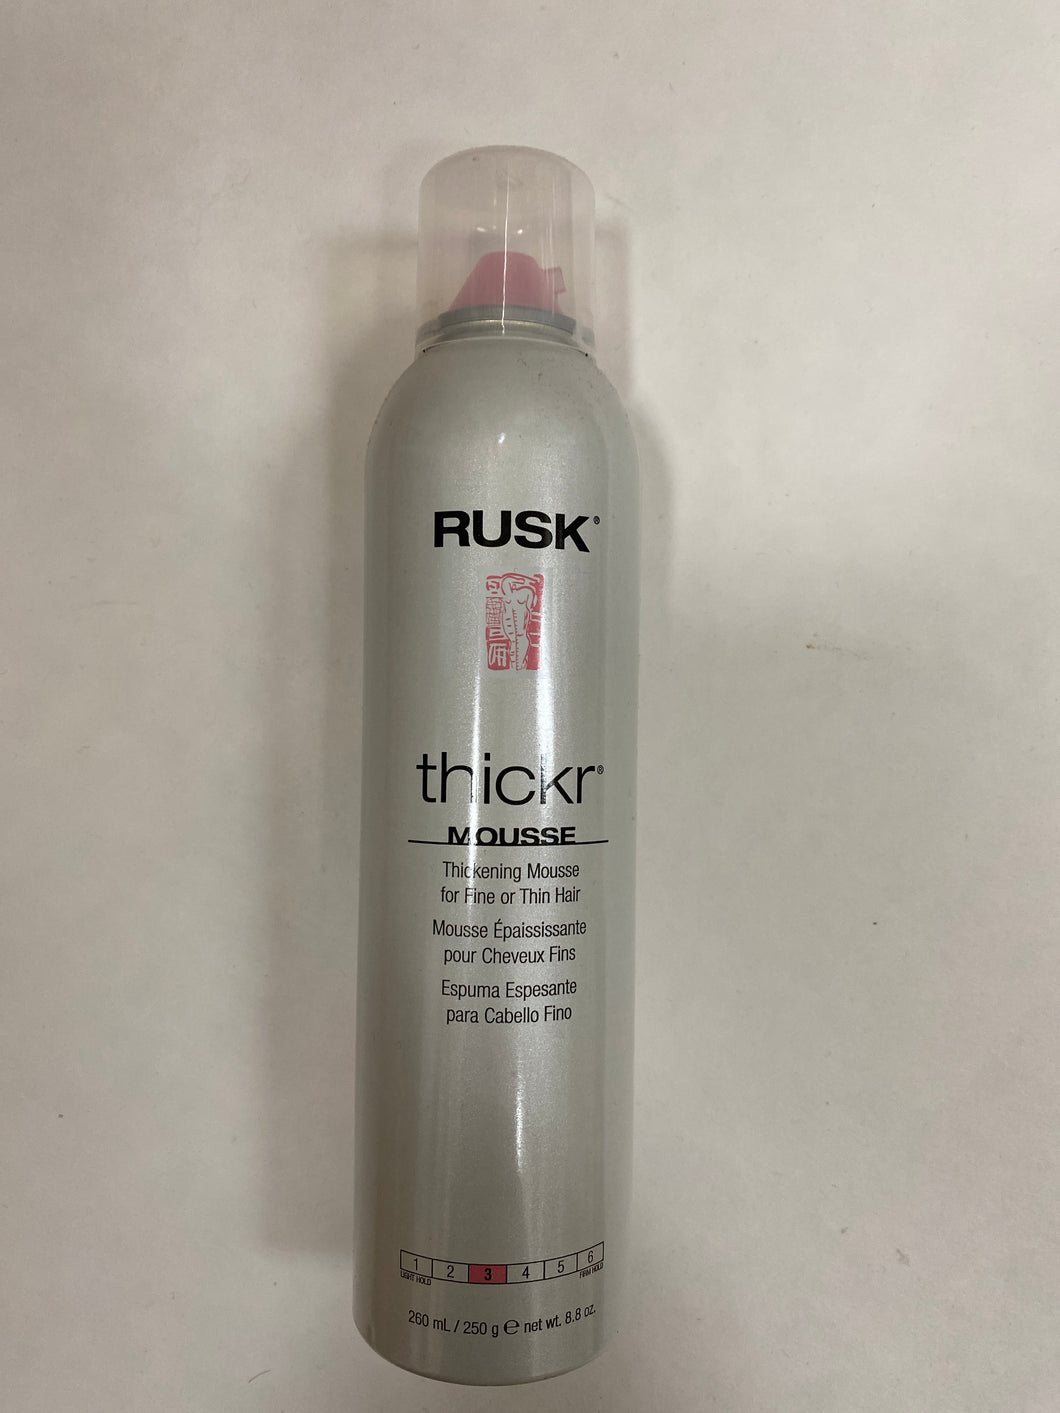 Rusk Thickr Mousse for fine hair